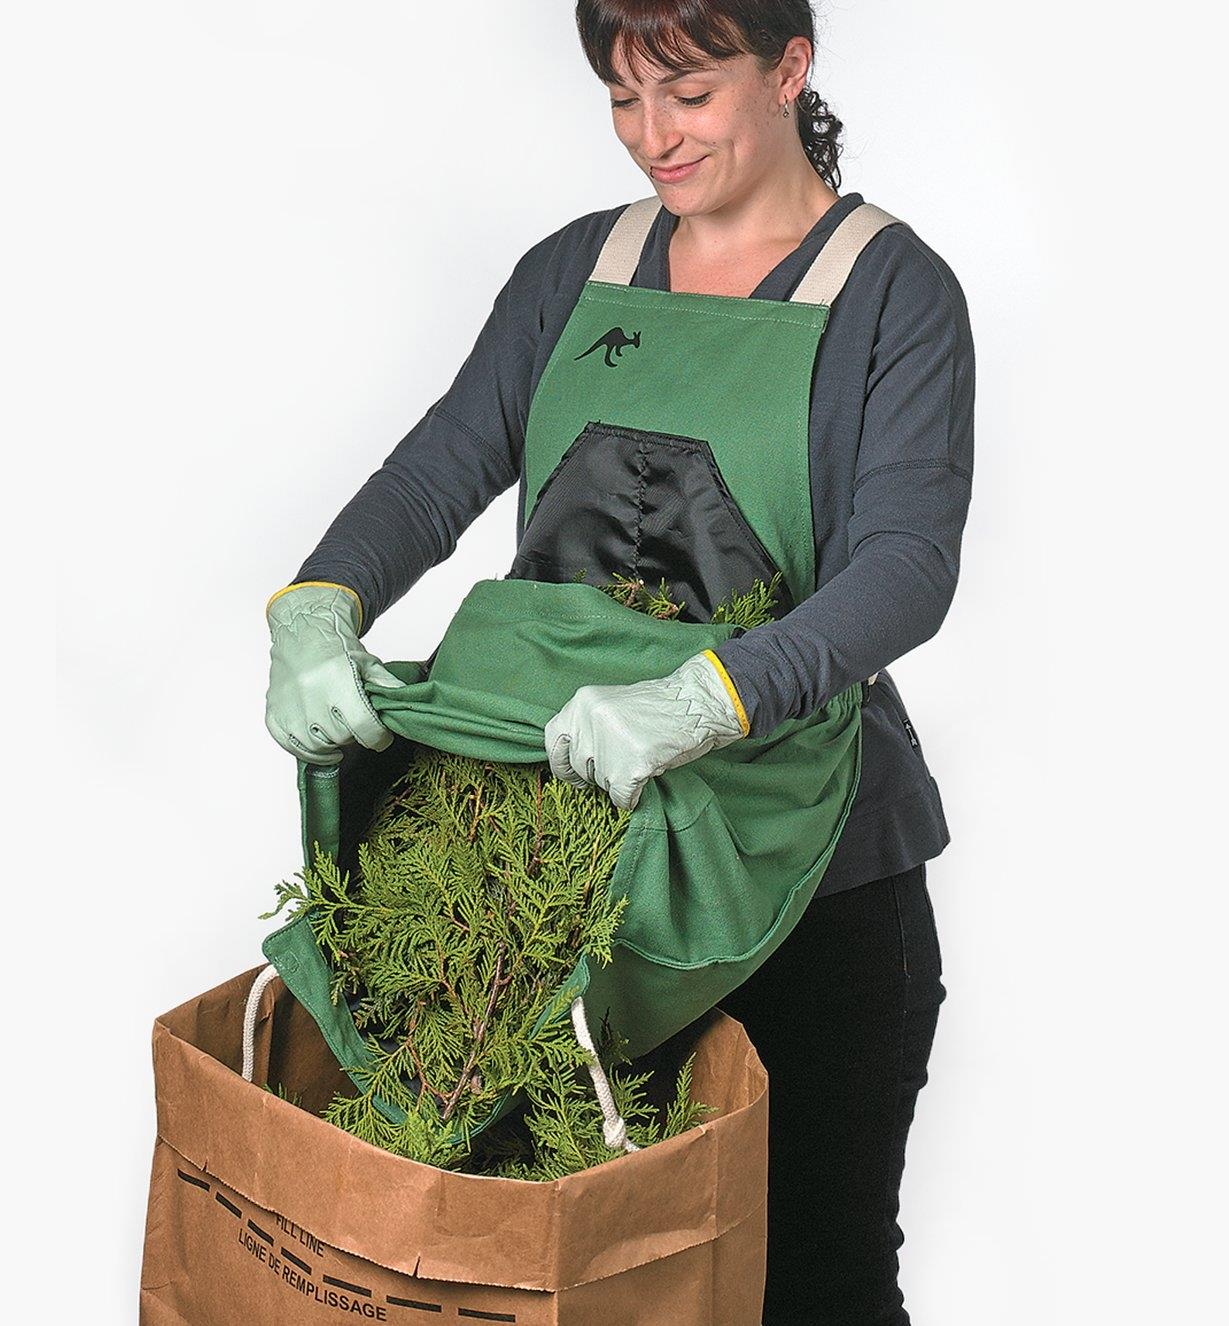 A woman wearing the kangaroo pocket apron dumps cedar trimmings from the pocket into a paper bag